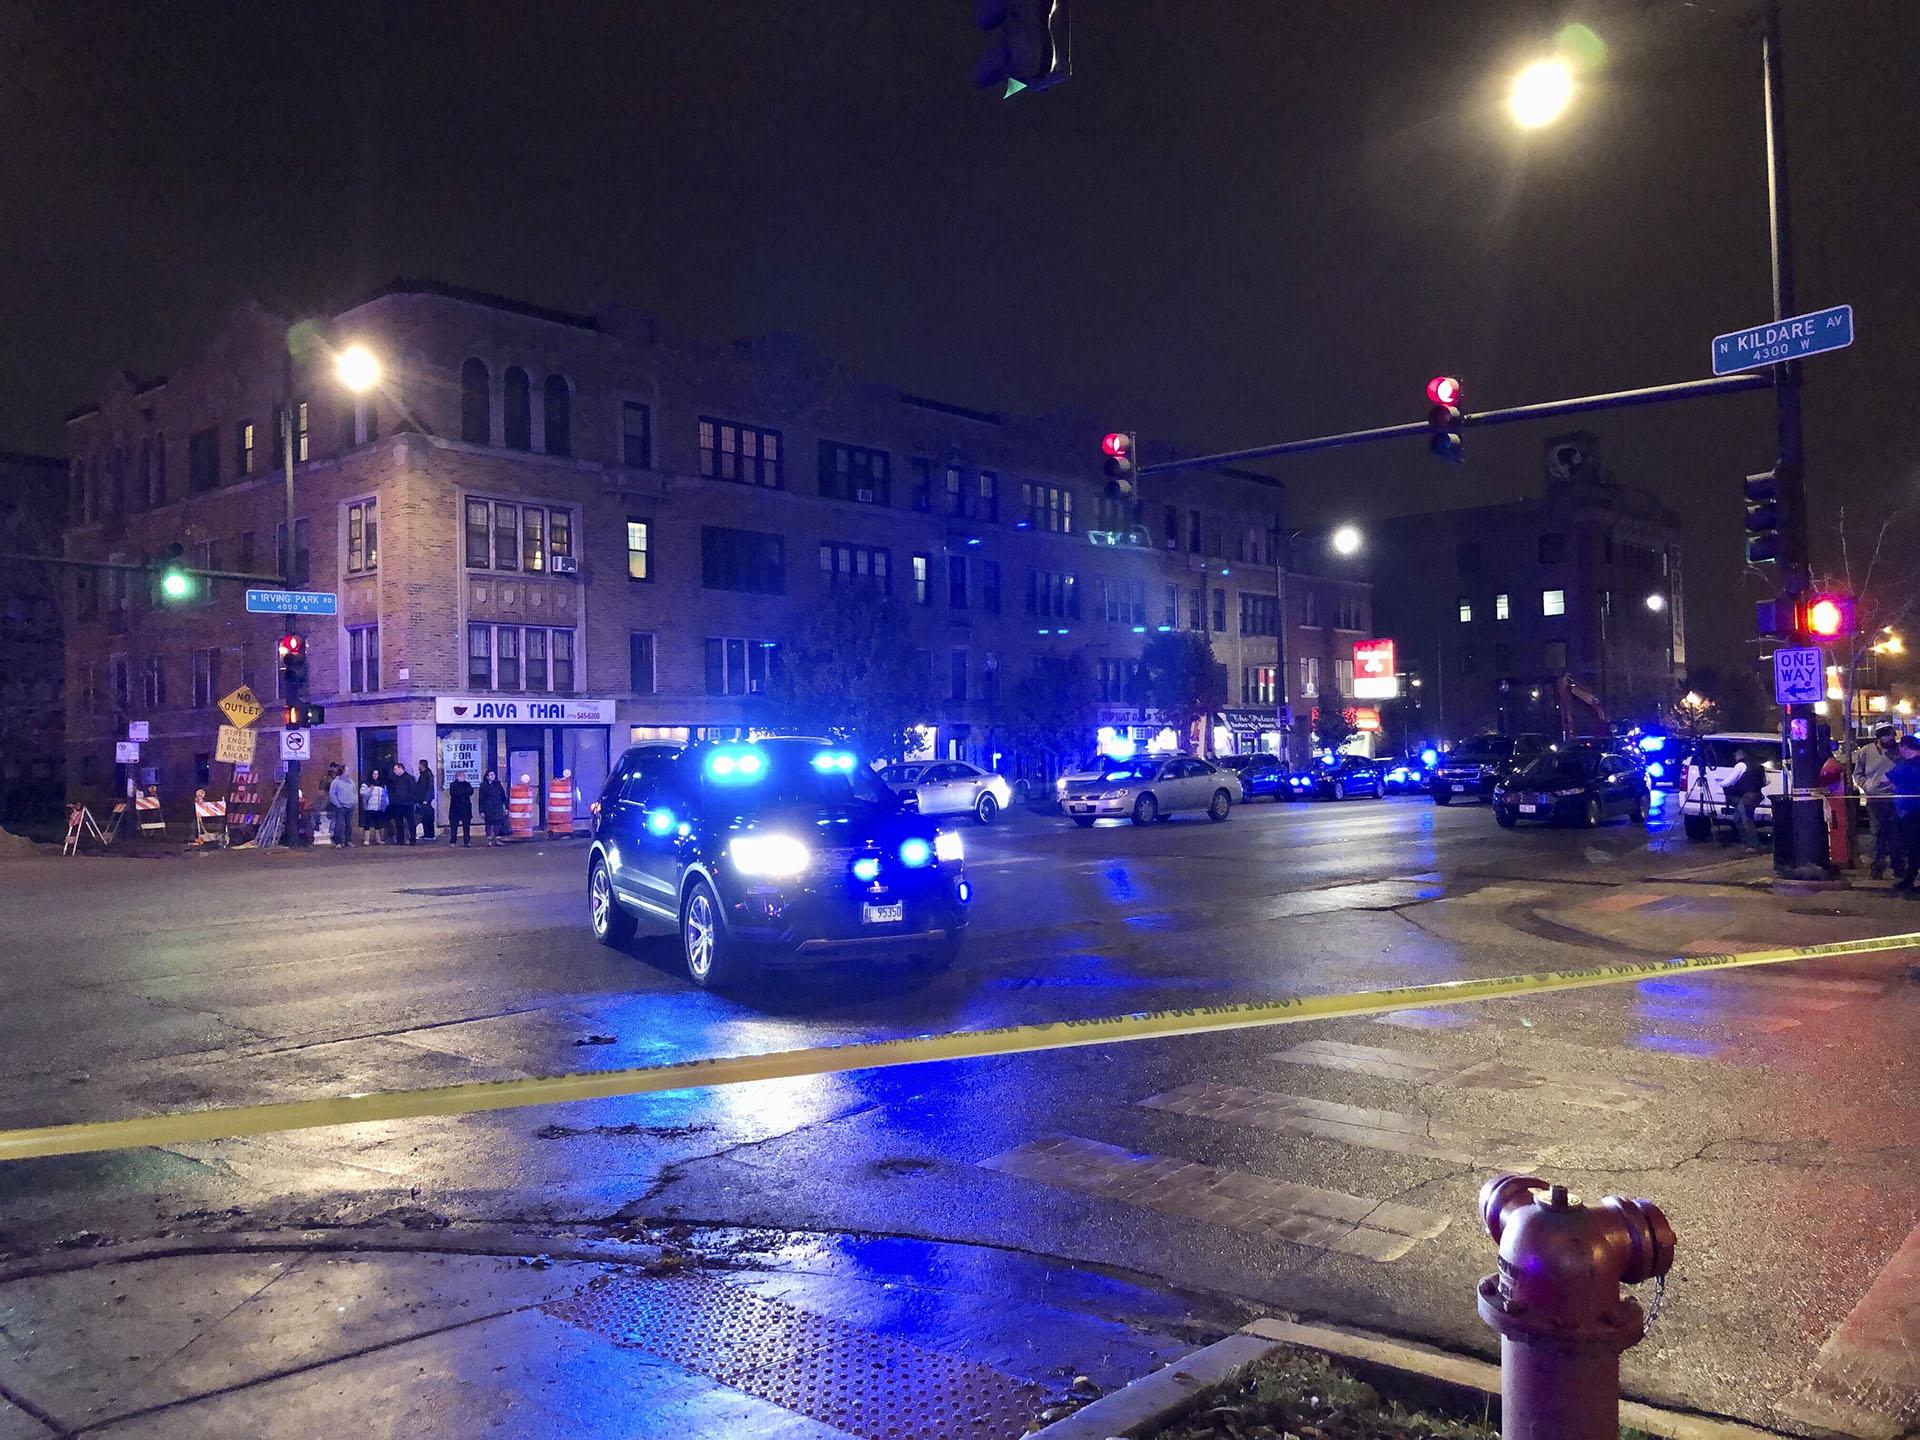 Chicago Police investigate the scene where an officer was shot by a suspected bank robber in Chicago, Tuesday night, Nov. 19, 2019. A 15-year-old boy was also wounded in the shooting, while the suspect was shot and killed. (Sam Charles / Chicago Sun-Times via AP)